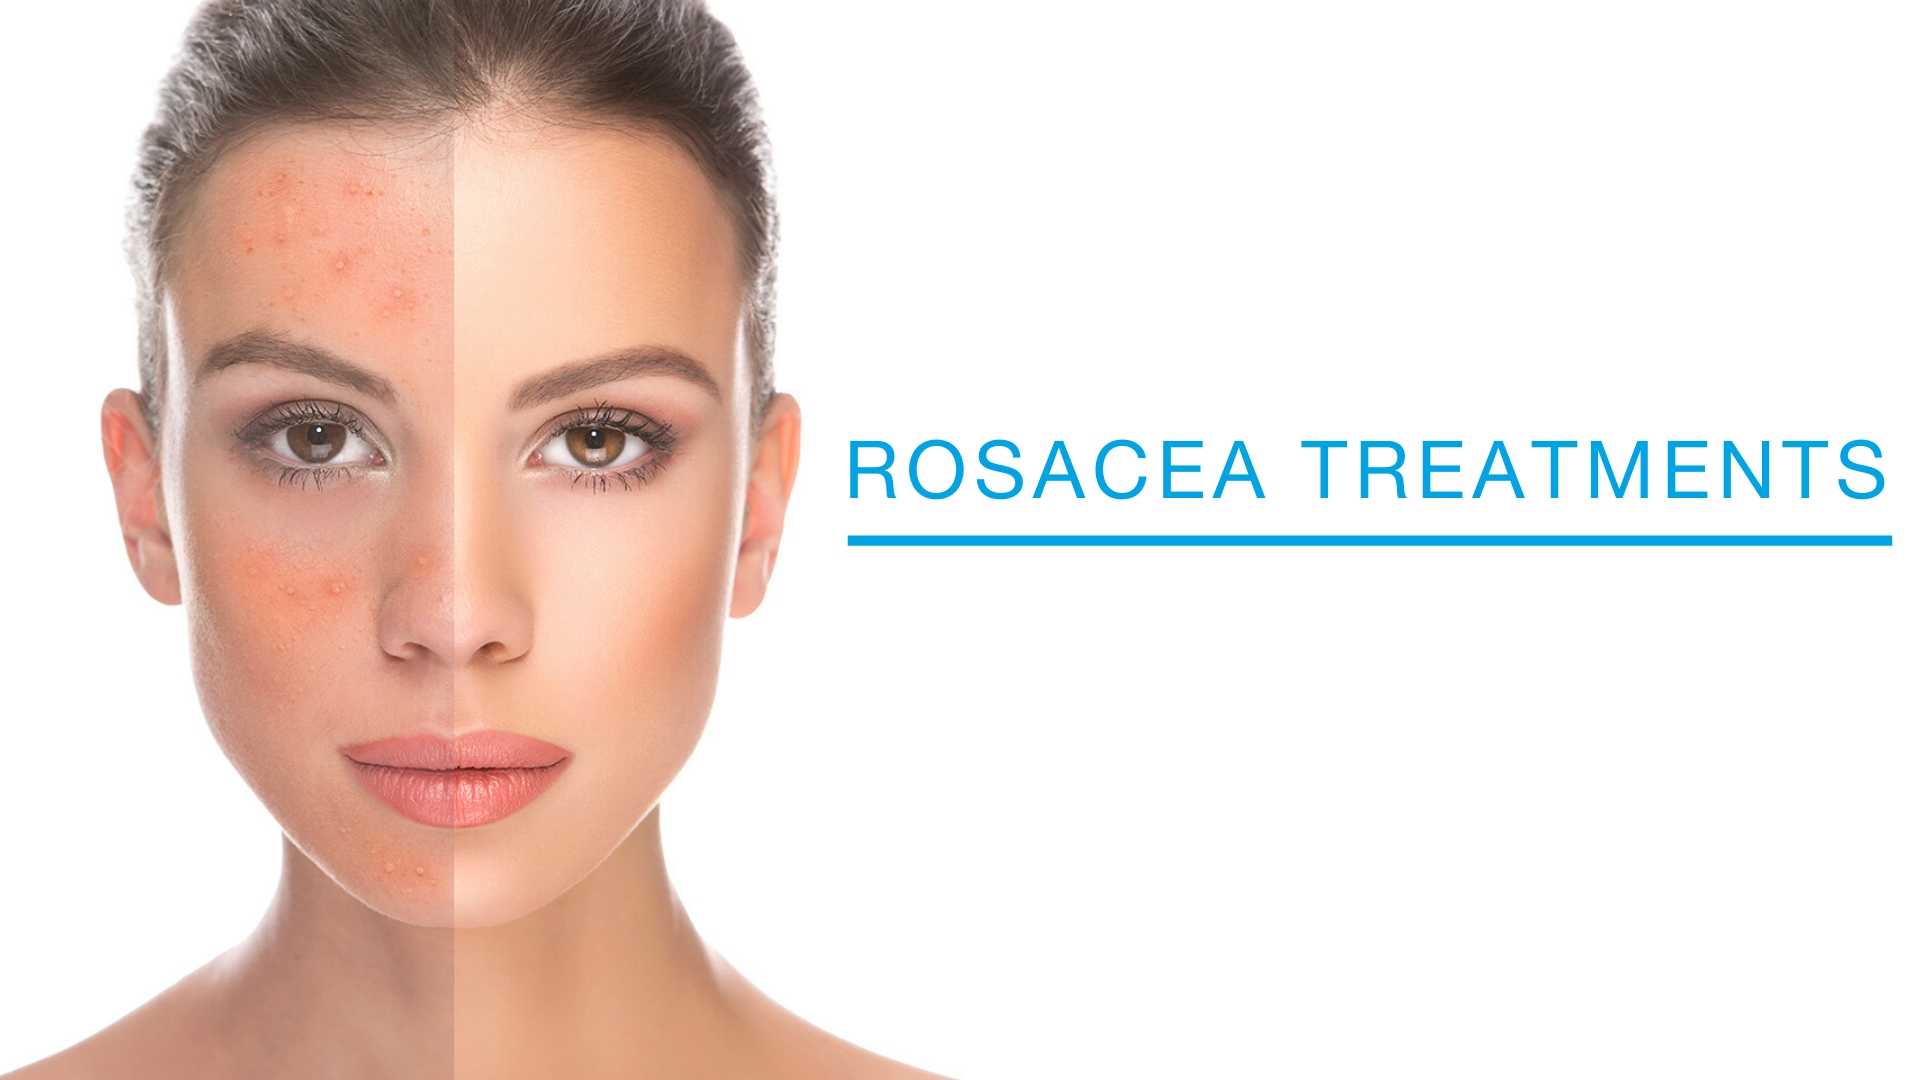 Woman's before and after split comparison after rosacea treatment.